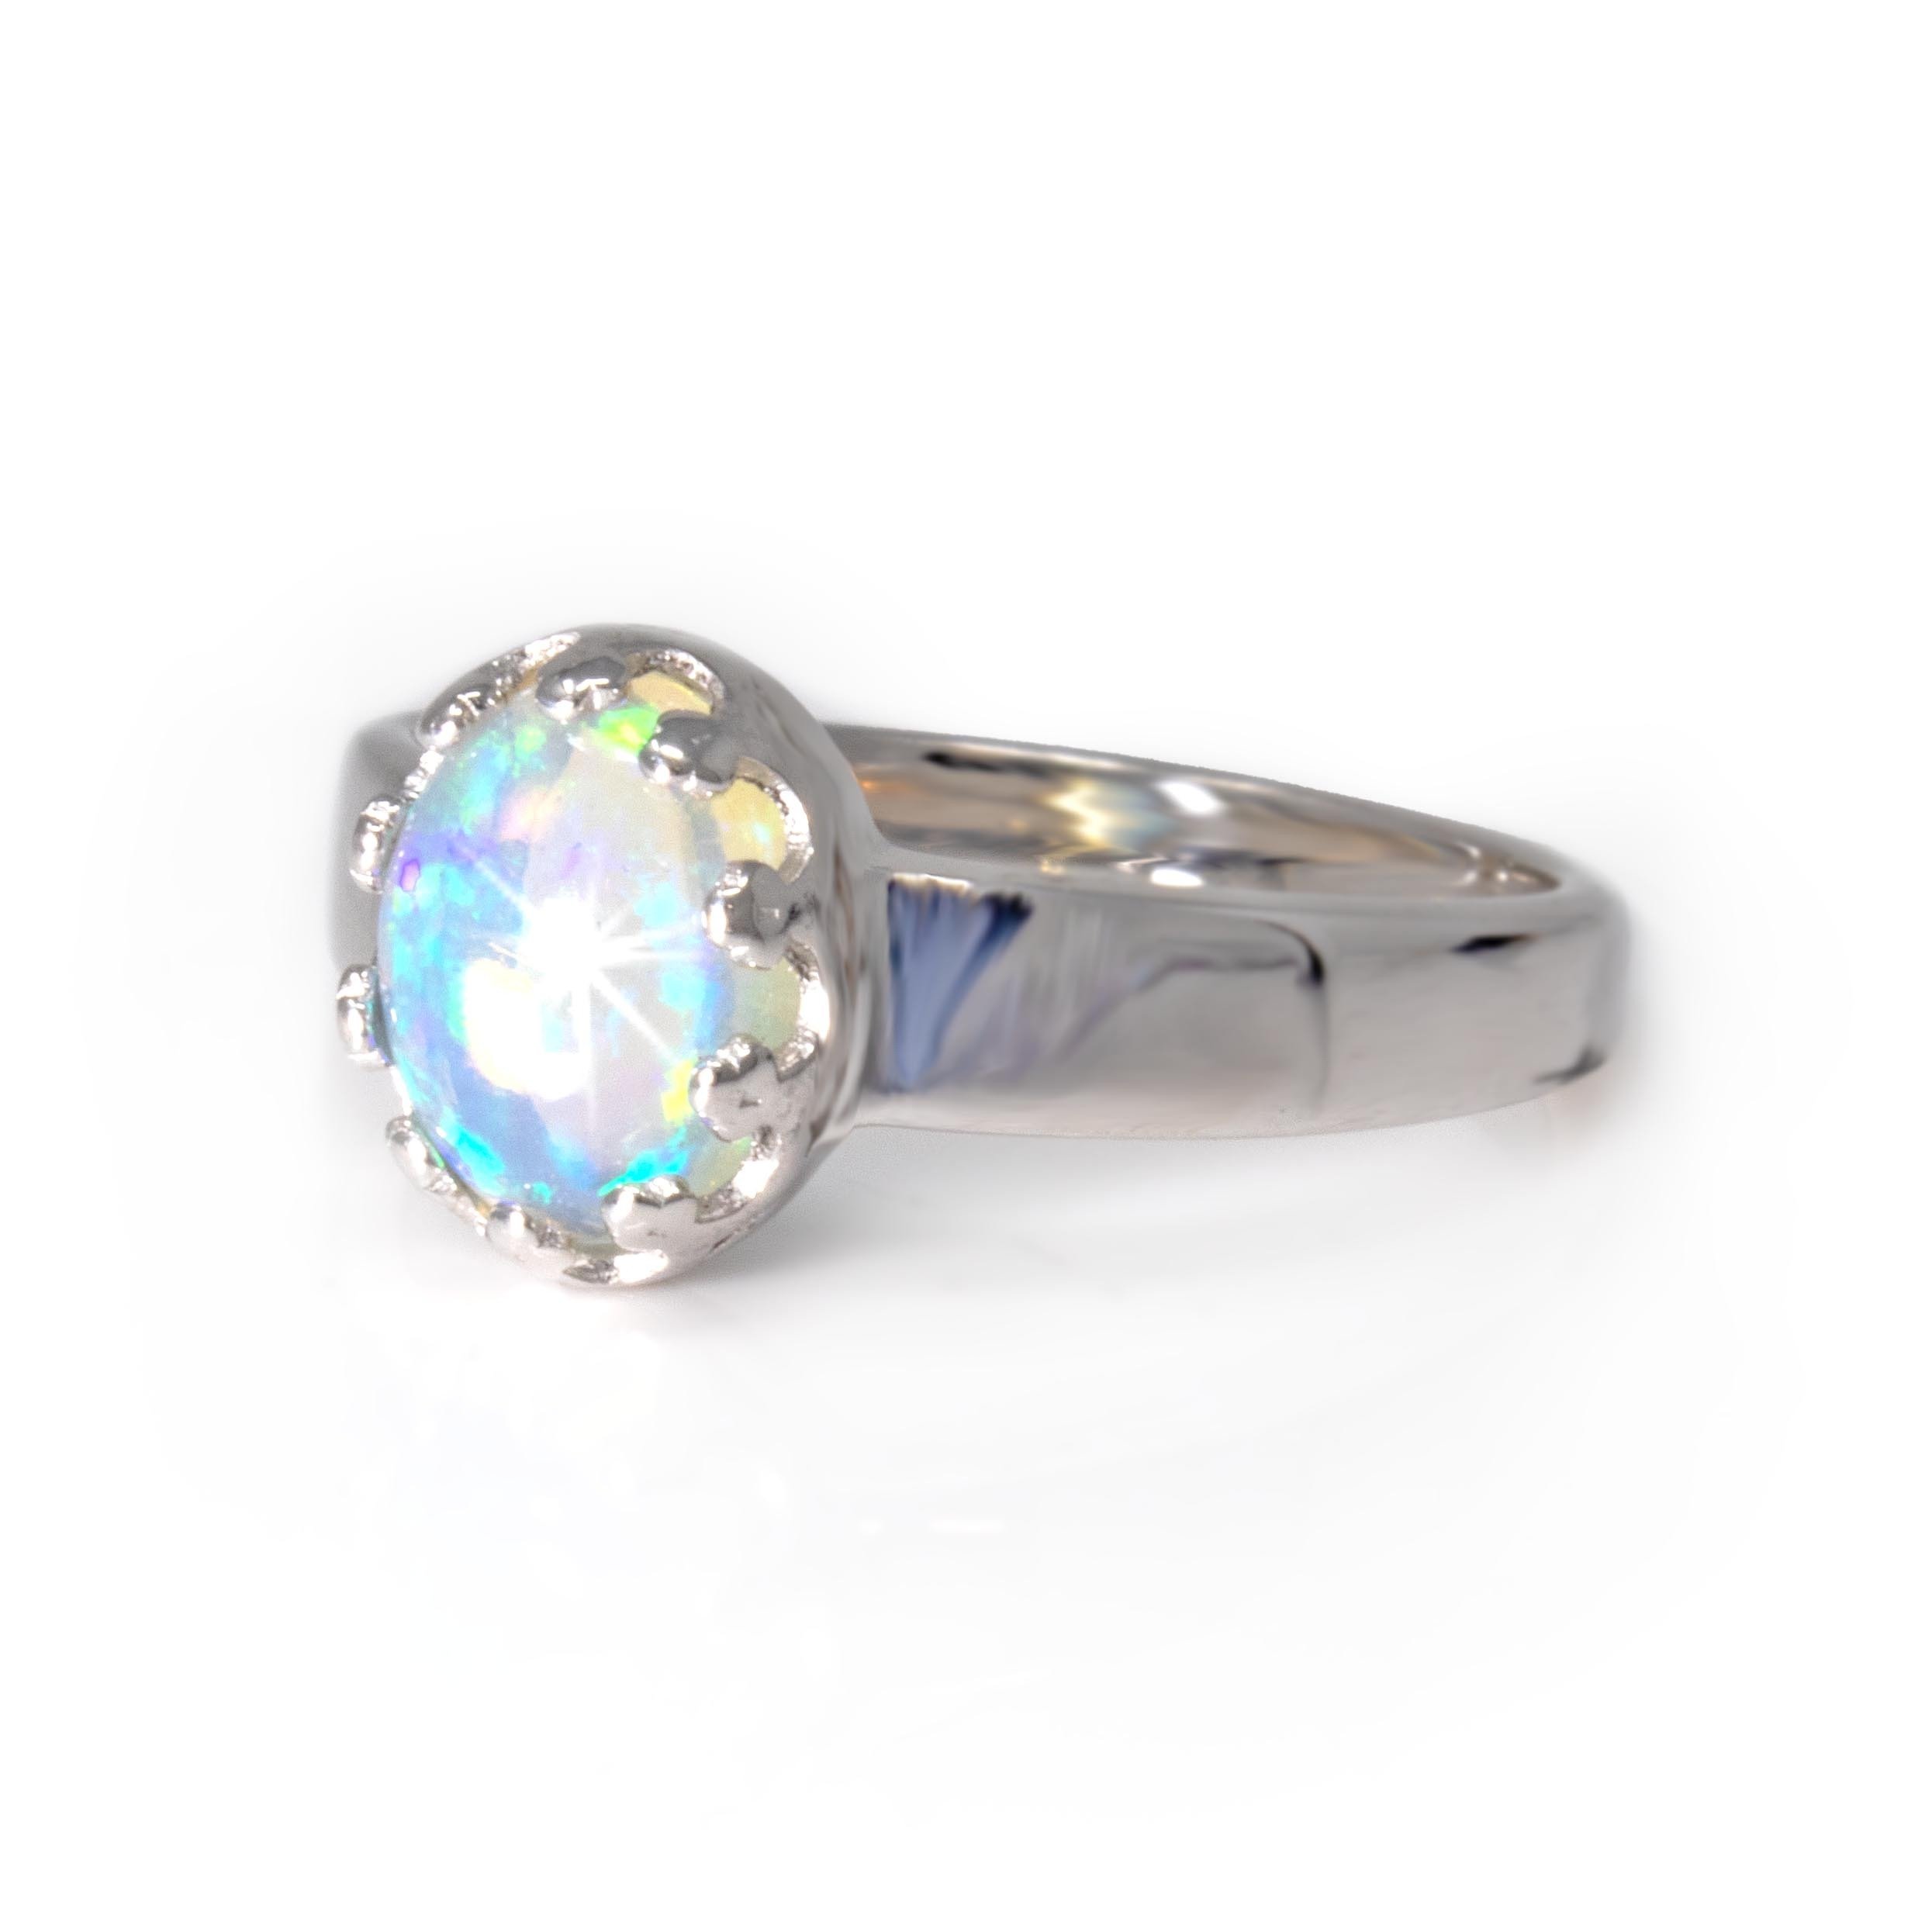 Ethiopian Opal Ring Size 8 - Simple Oval Cabochon With Silver Princess Style Bezel & Tapered Band